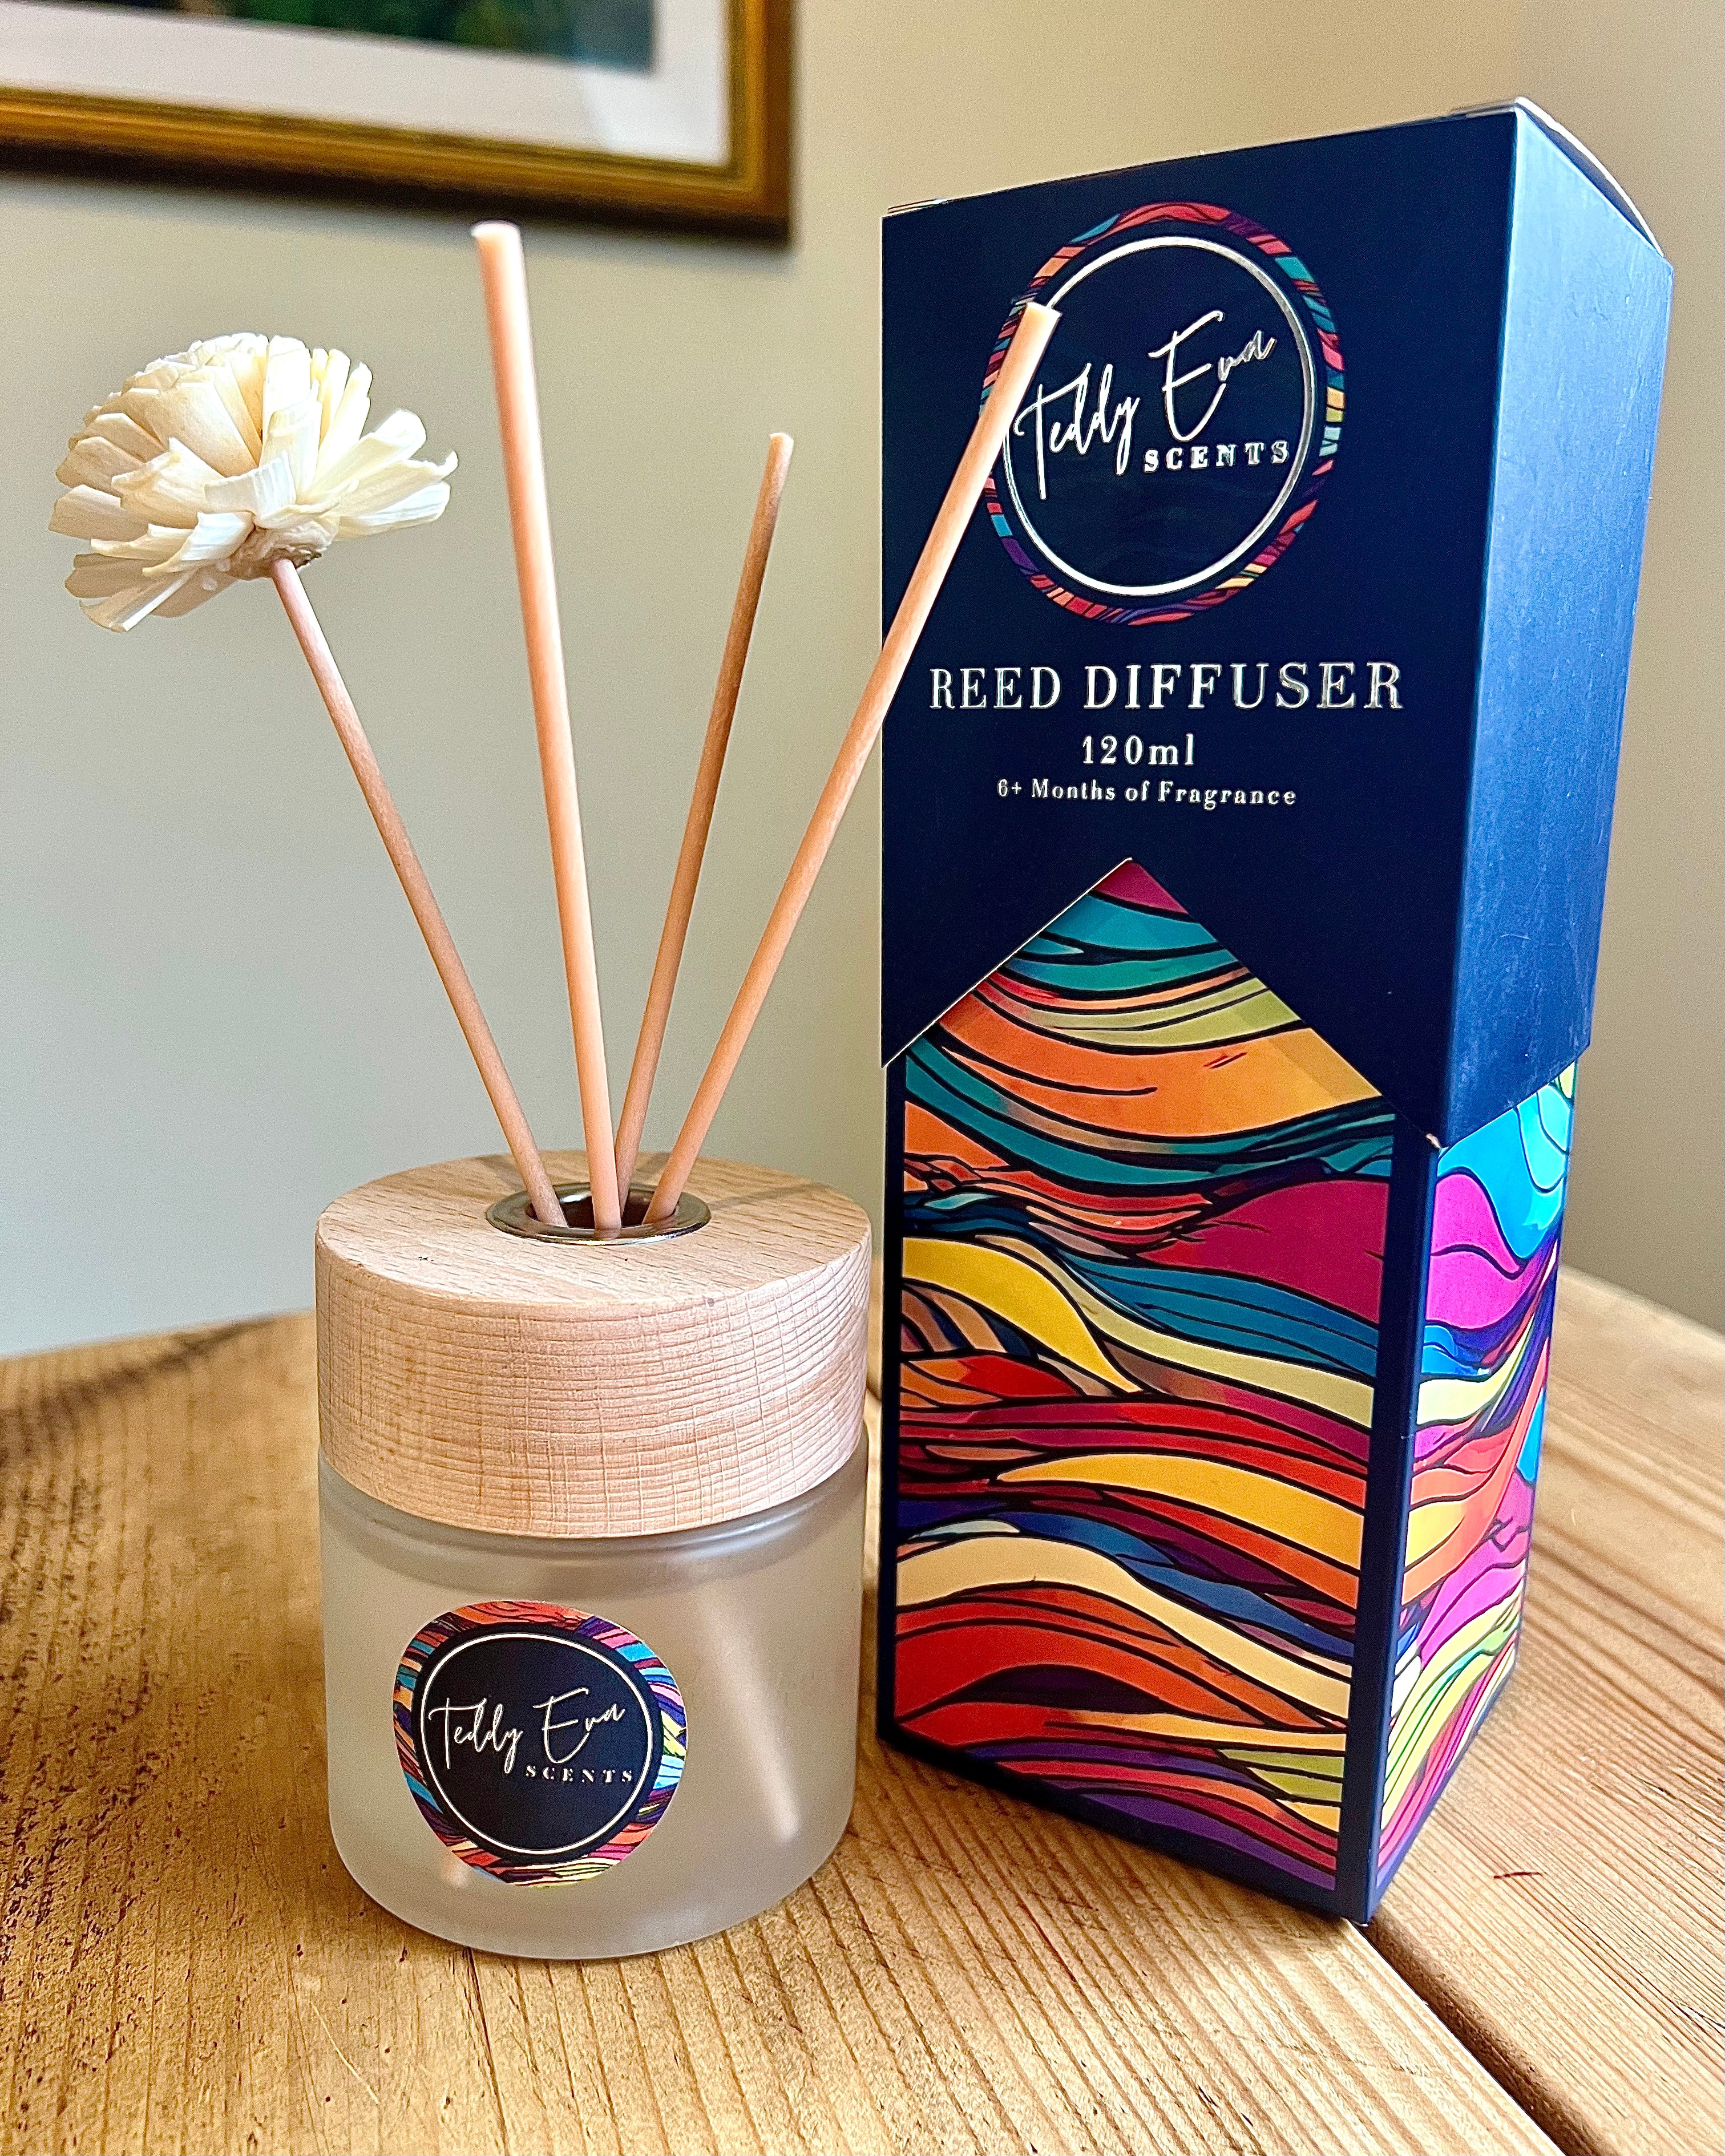 Pink Fizz & Pomelo 120ml Reed Diffuser